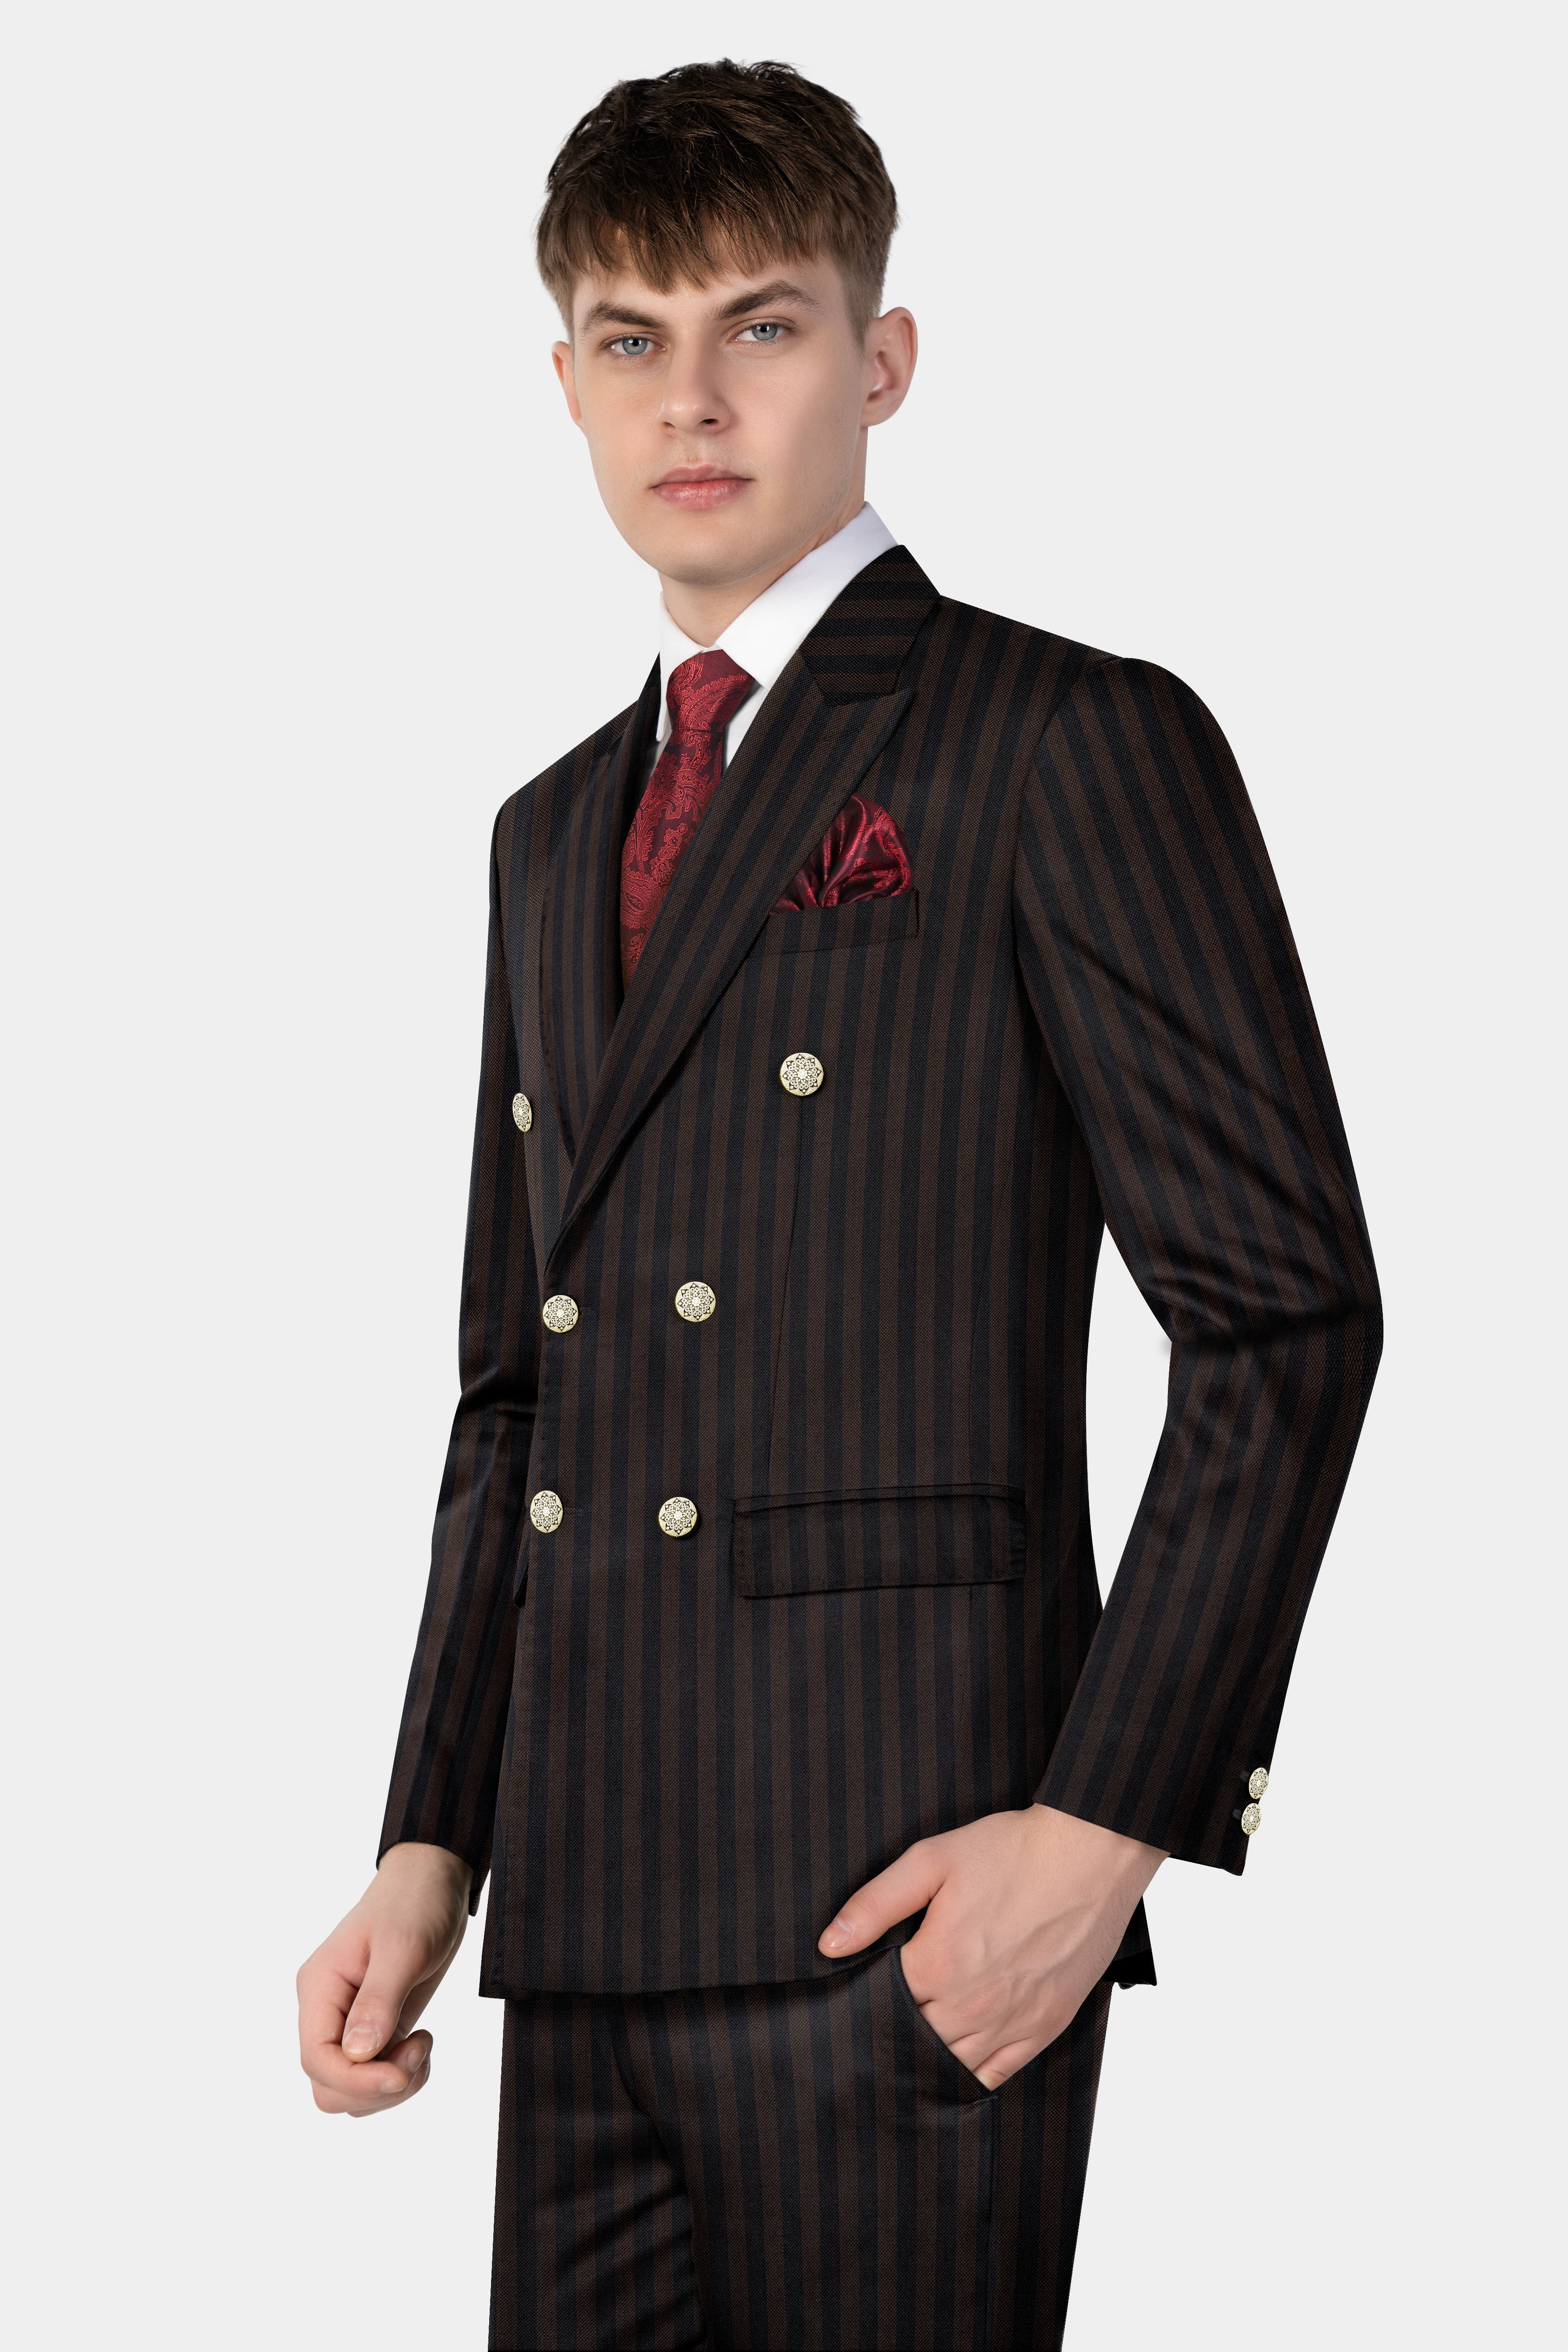 Eternity Brown With Vulcan Black Striped Wool Blend Double Breasted Blazer